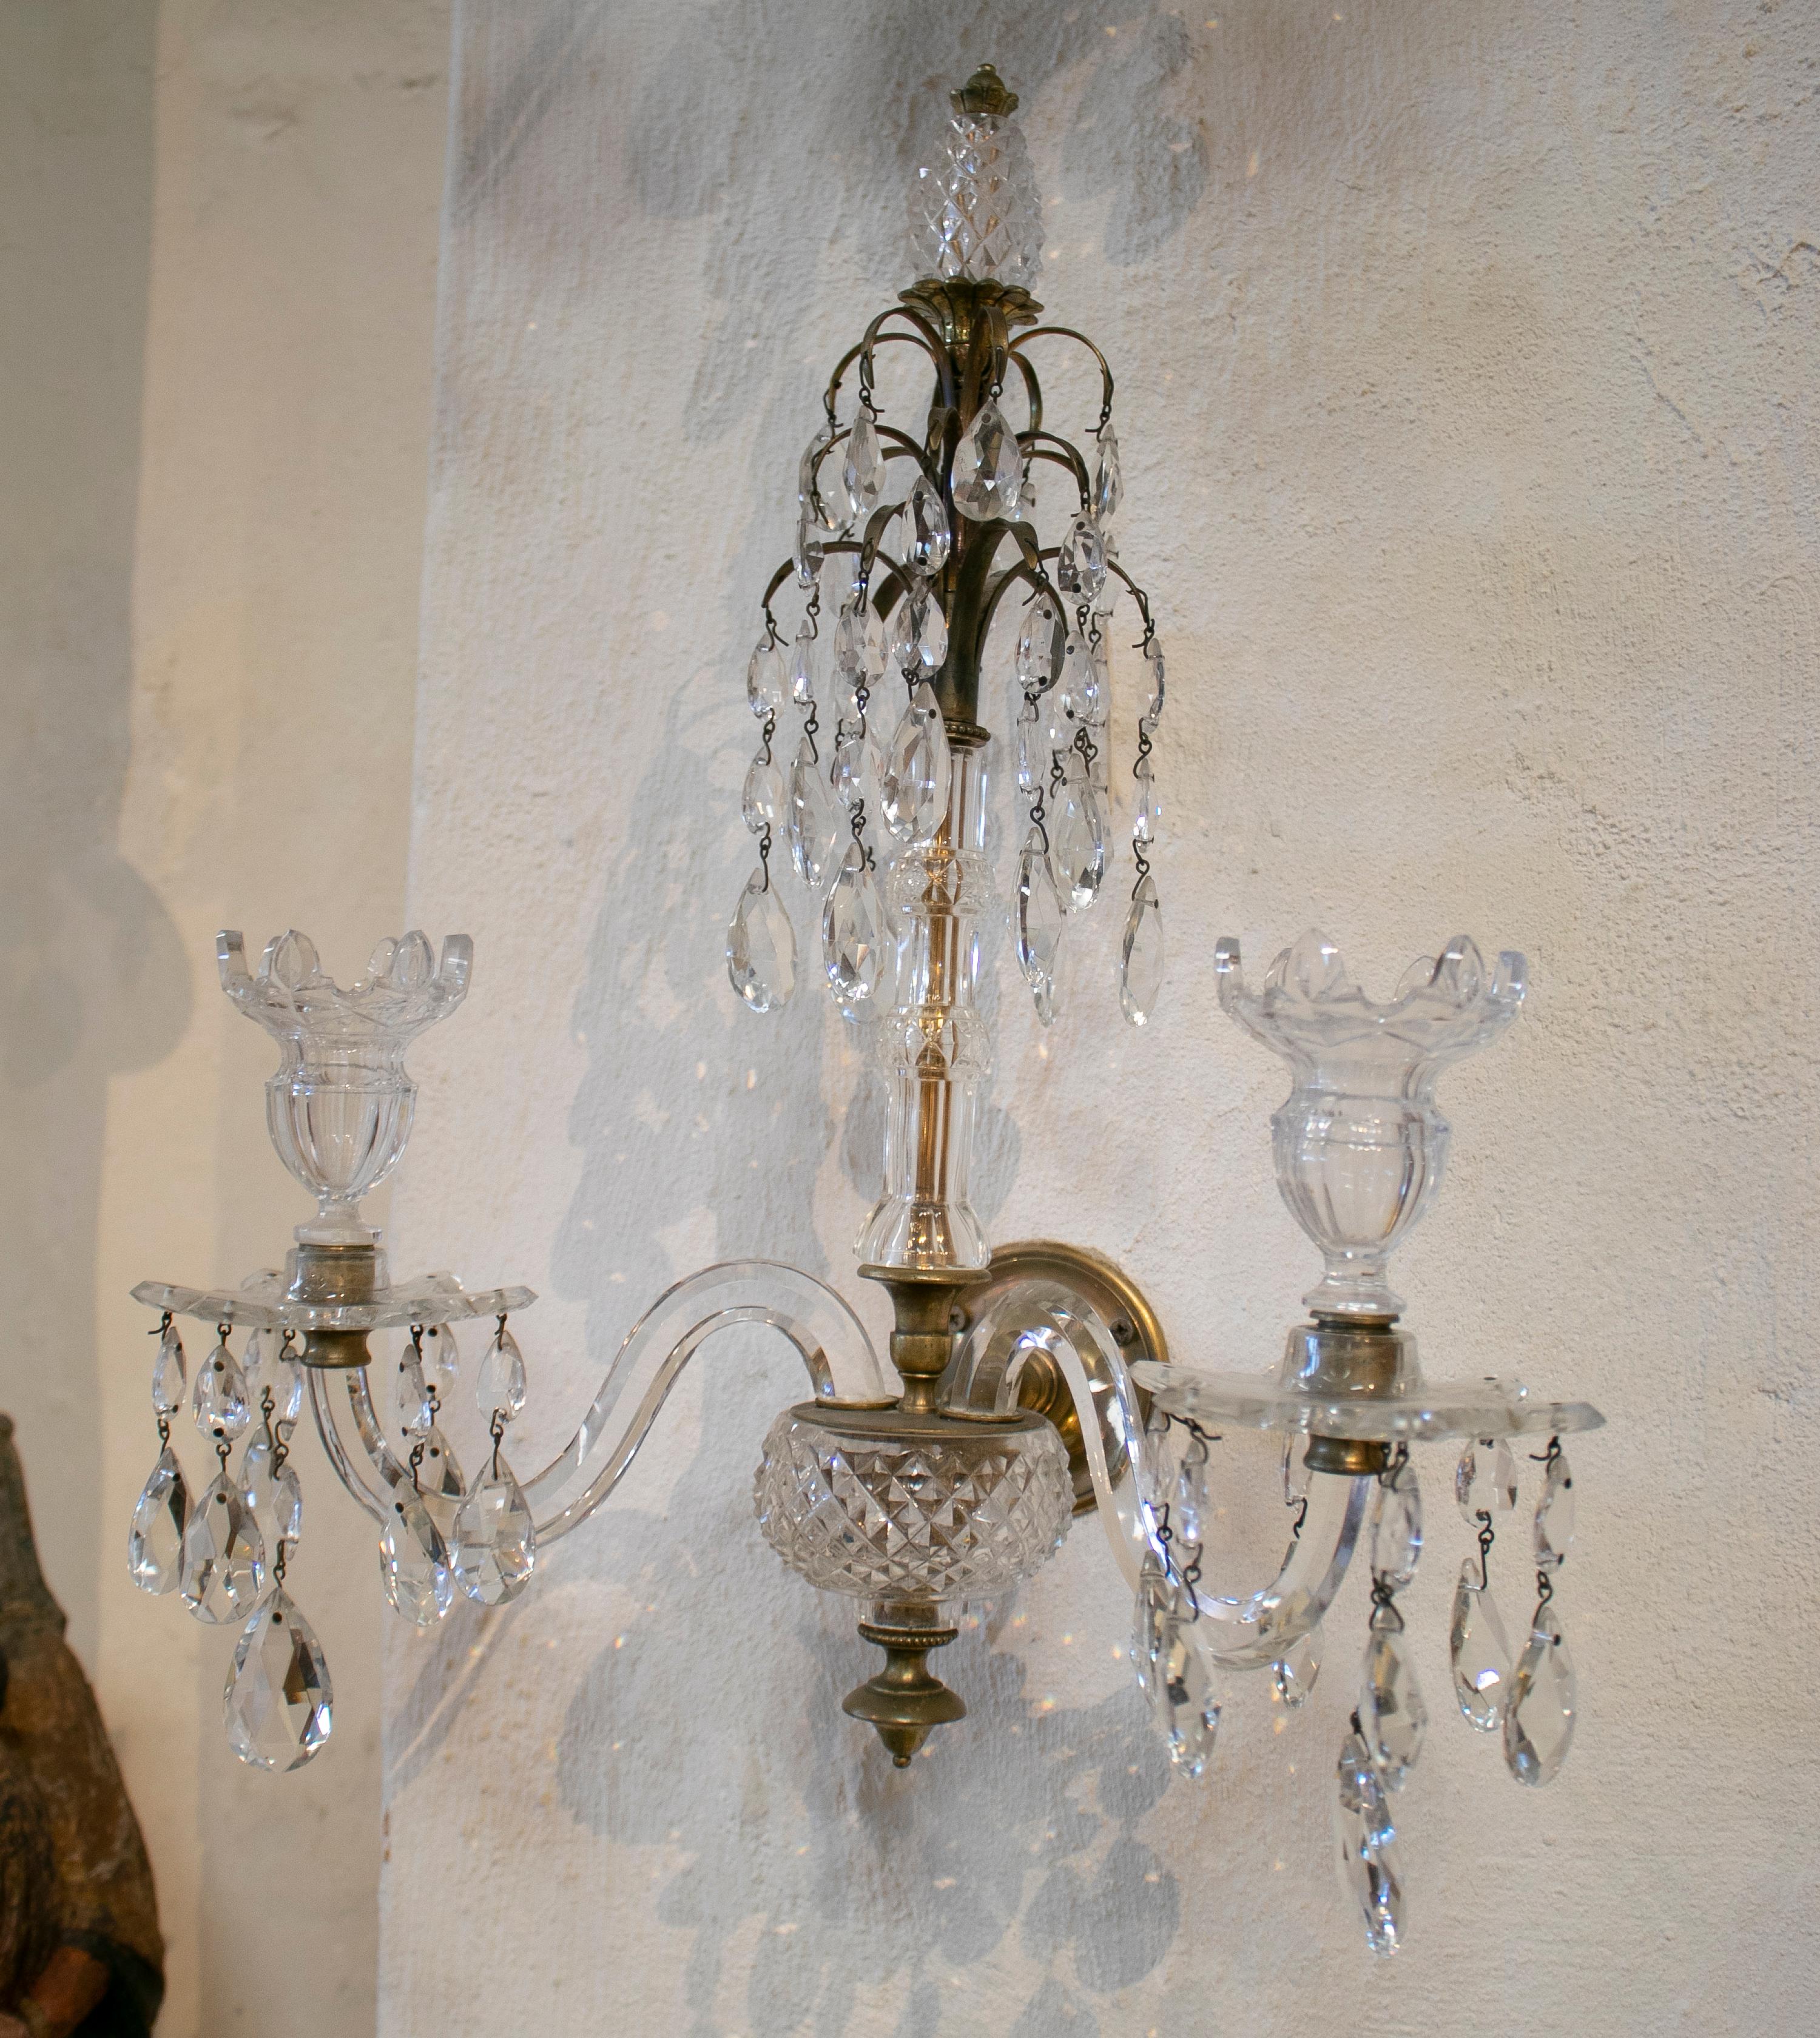 1850s pair of French Baccarat two-arm wall lamps.

Société Baccarat is a French company recognized as one of the most important in the glass design industry for its quality and texture. It is located in Baccarat and its museum displays the finest